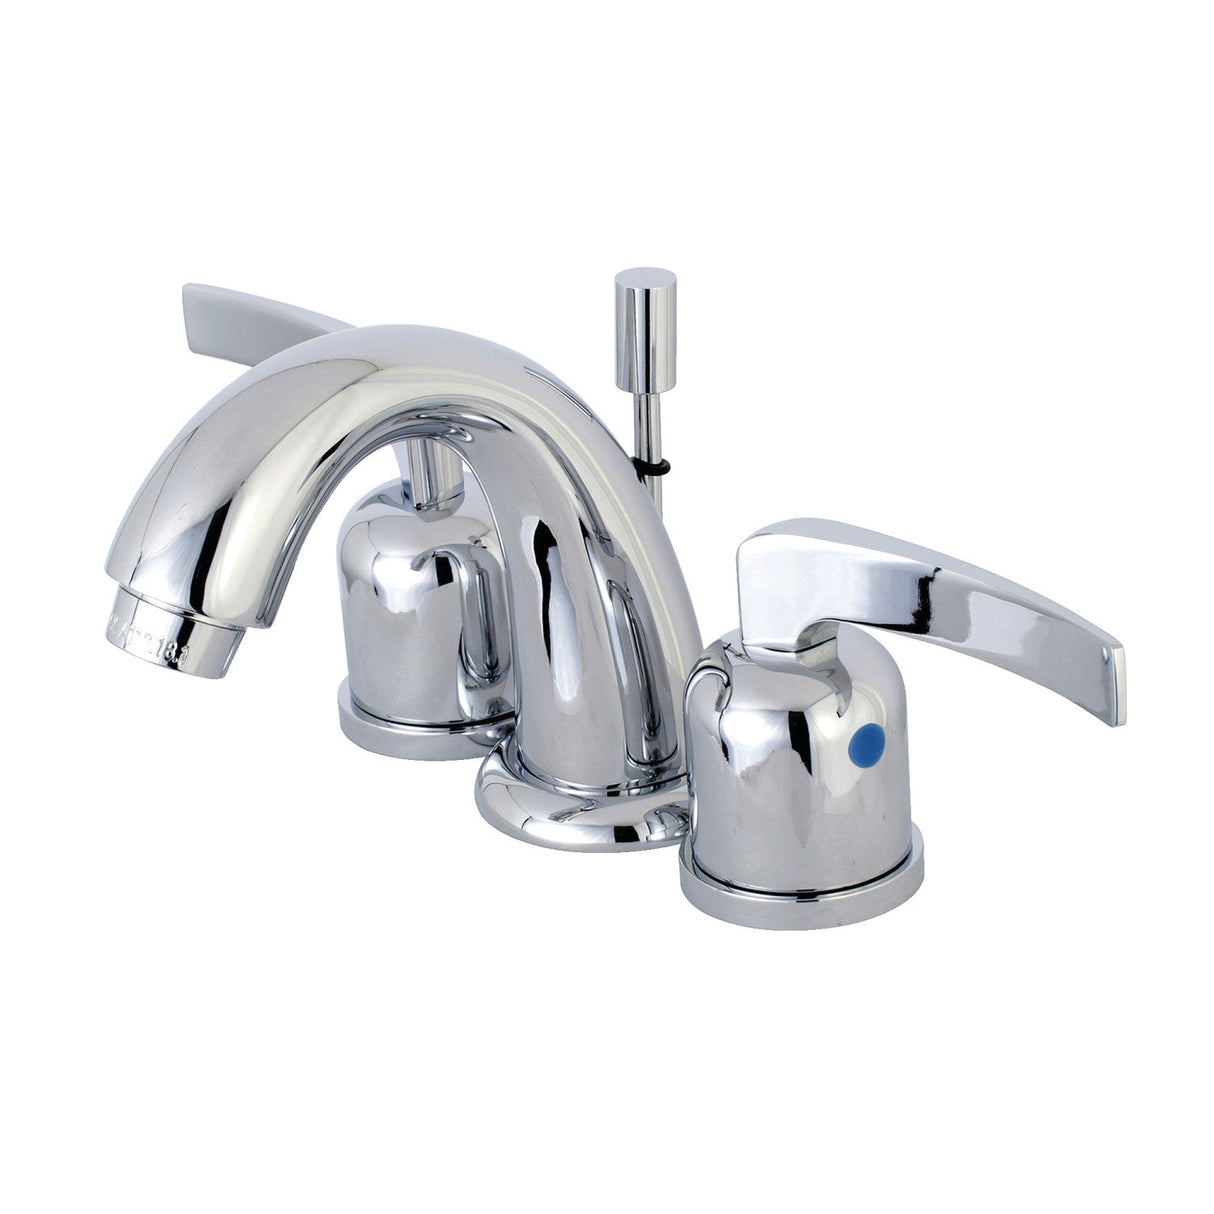 Centurion KB8911EFL Two-Handle 3-Hole Deck Mount Widespread Bathroom Faucet with Plastic Pop-Up, Polished Chrome